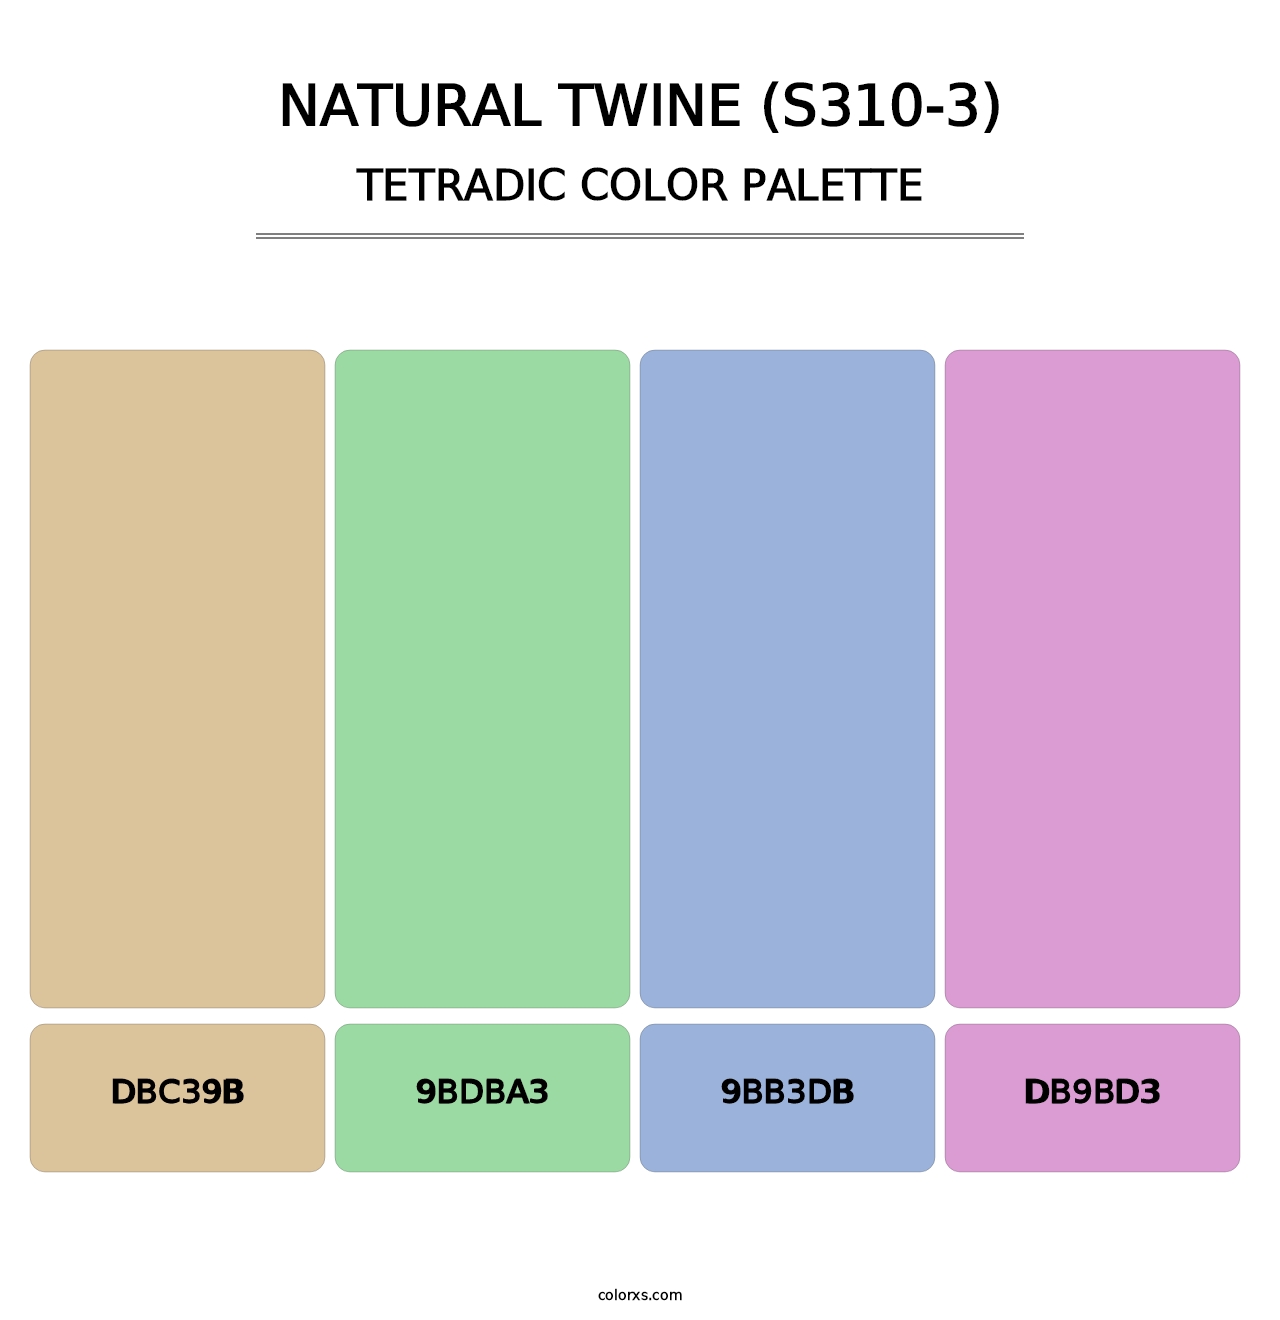 Natural Twine (S310-3) - Tetradic Color Palette